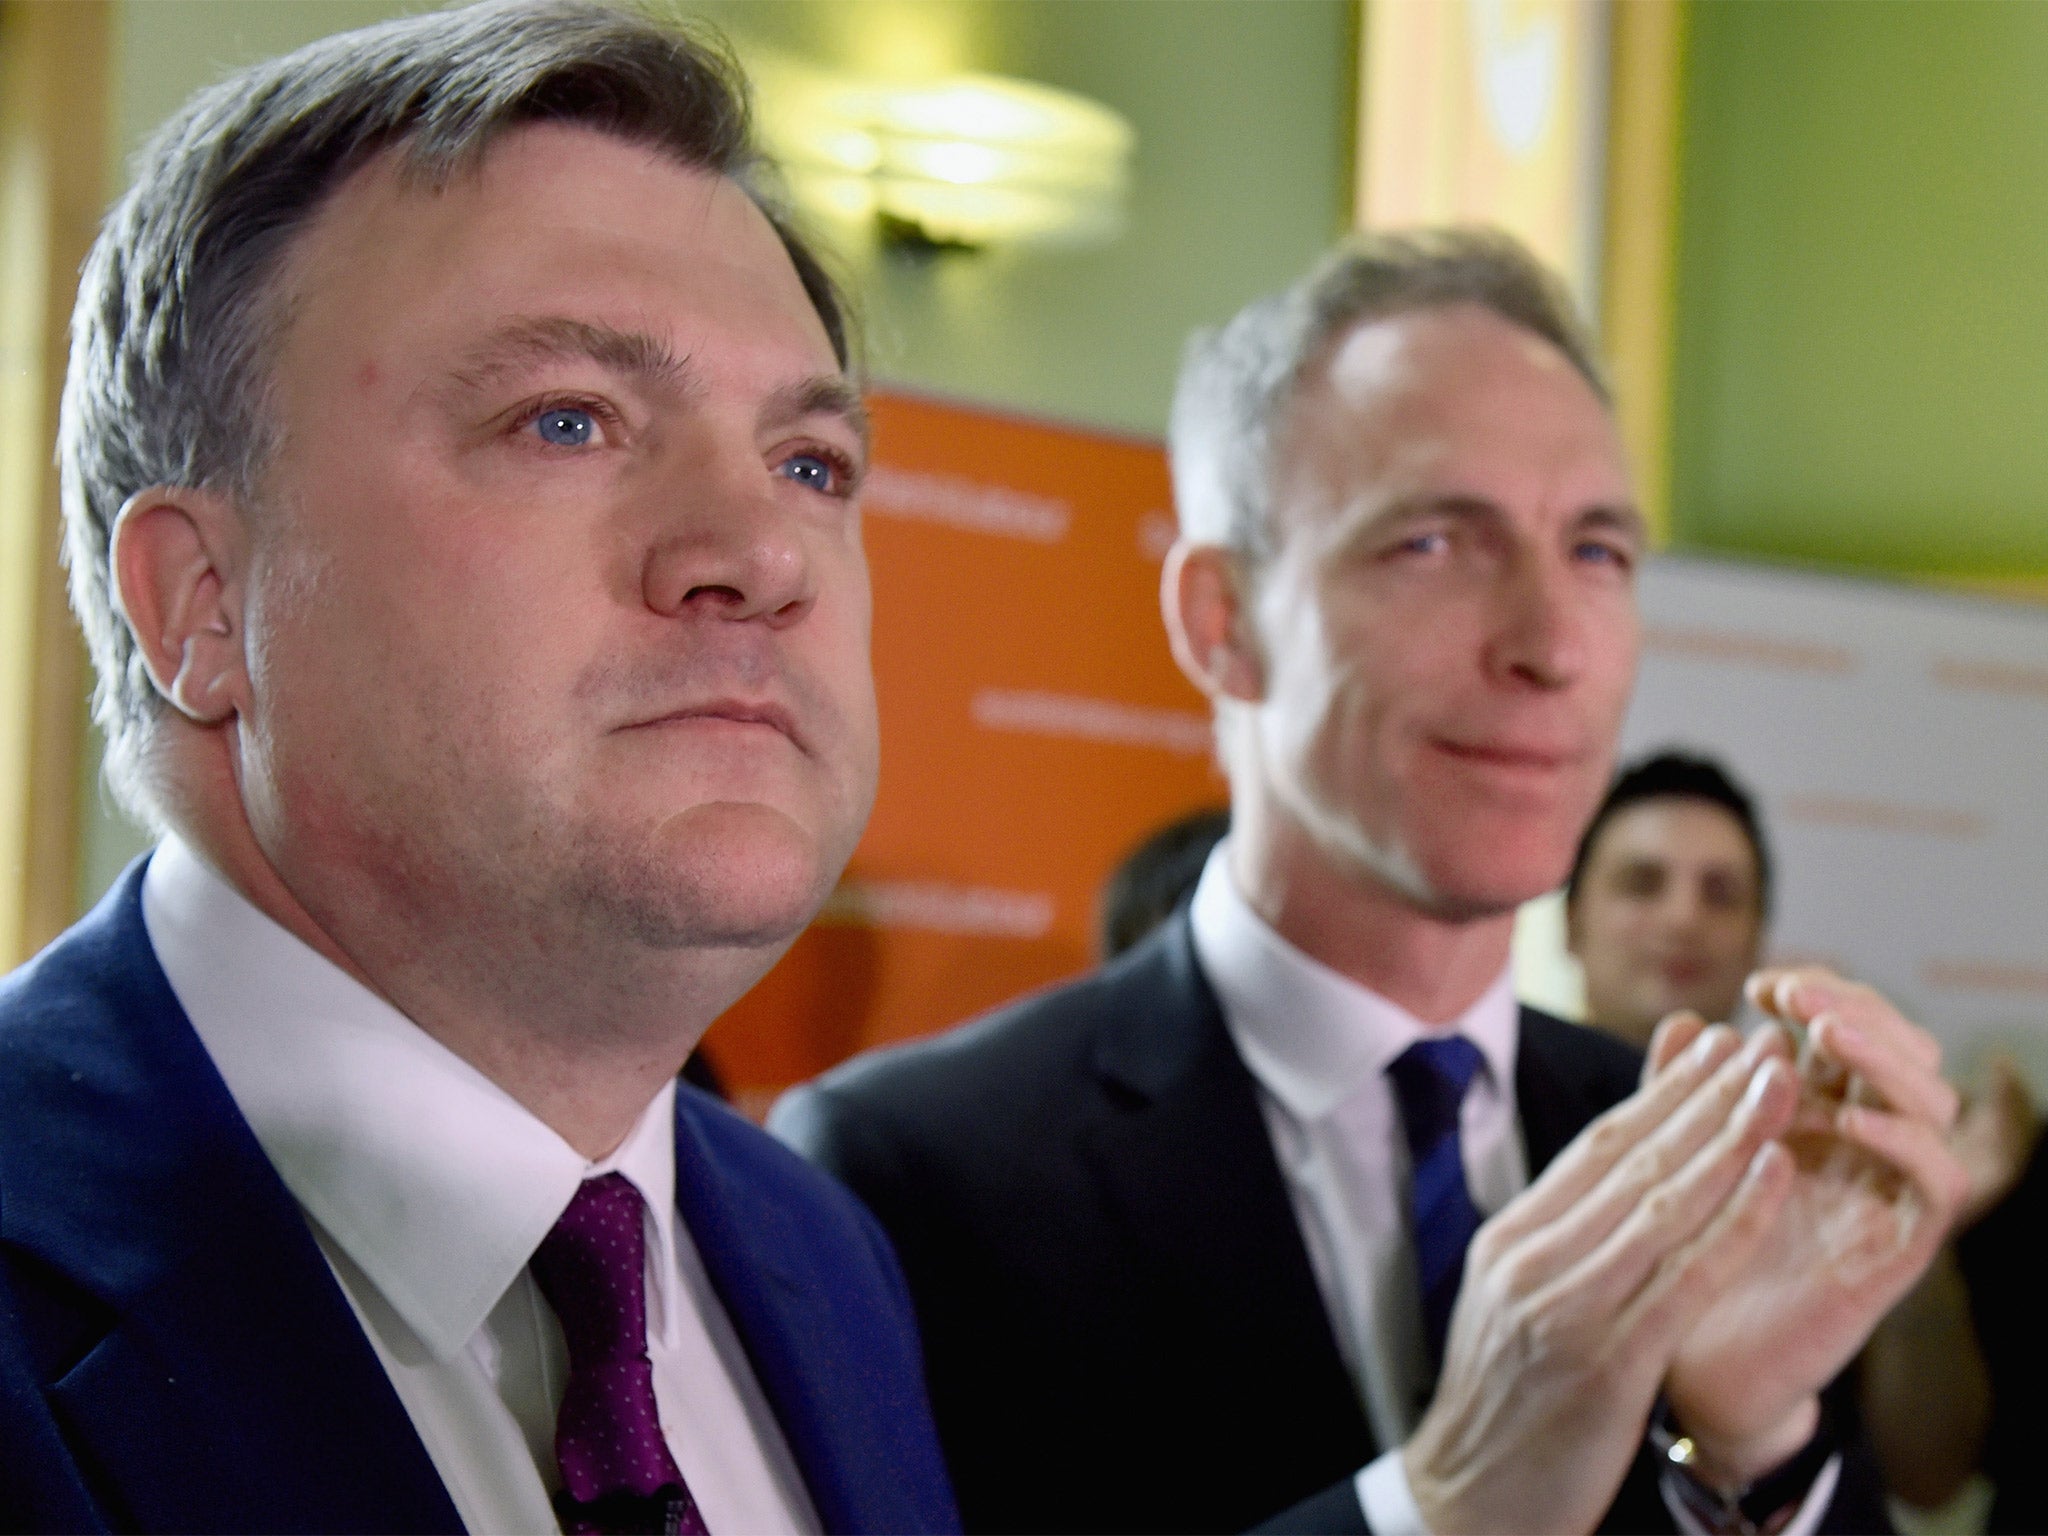 Labour's shadow Chancellor Ed Balls and Scottish Labour Leader Jim Murphy campaigning in Glasgow on Wednesday